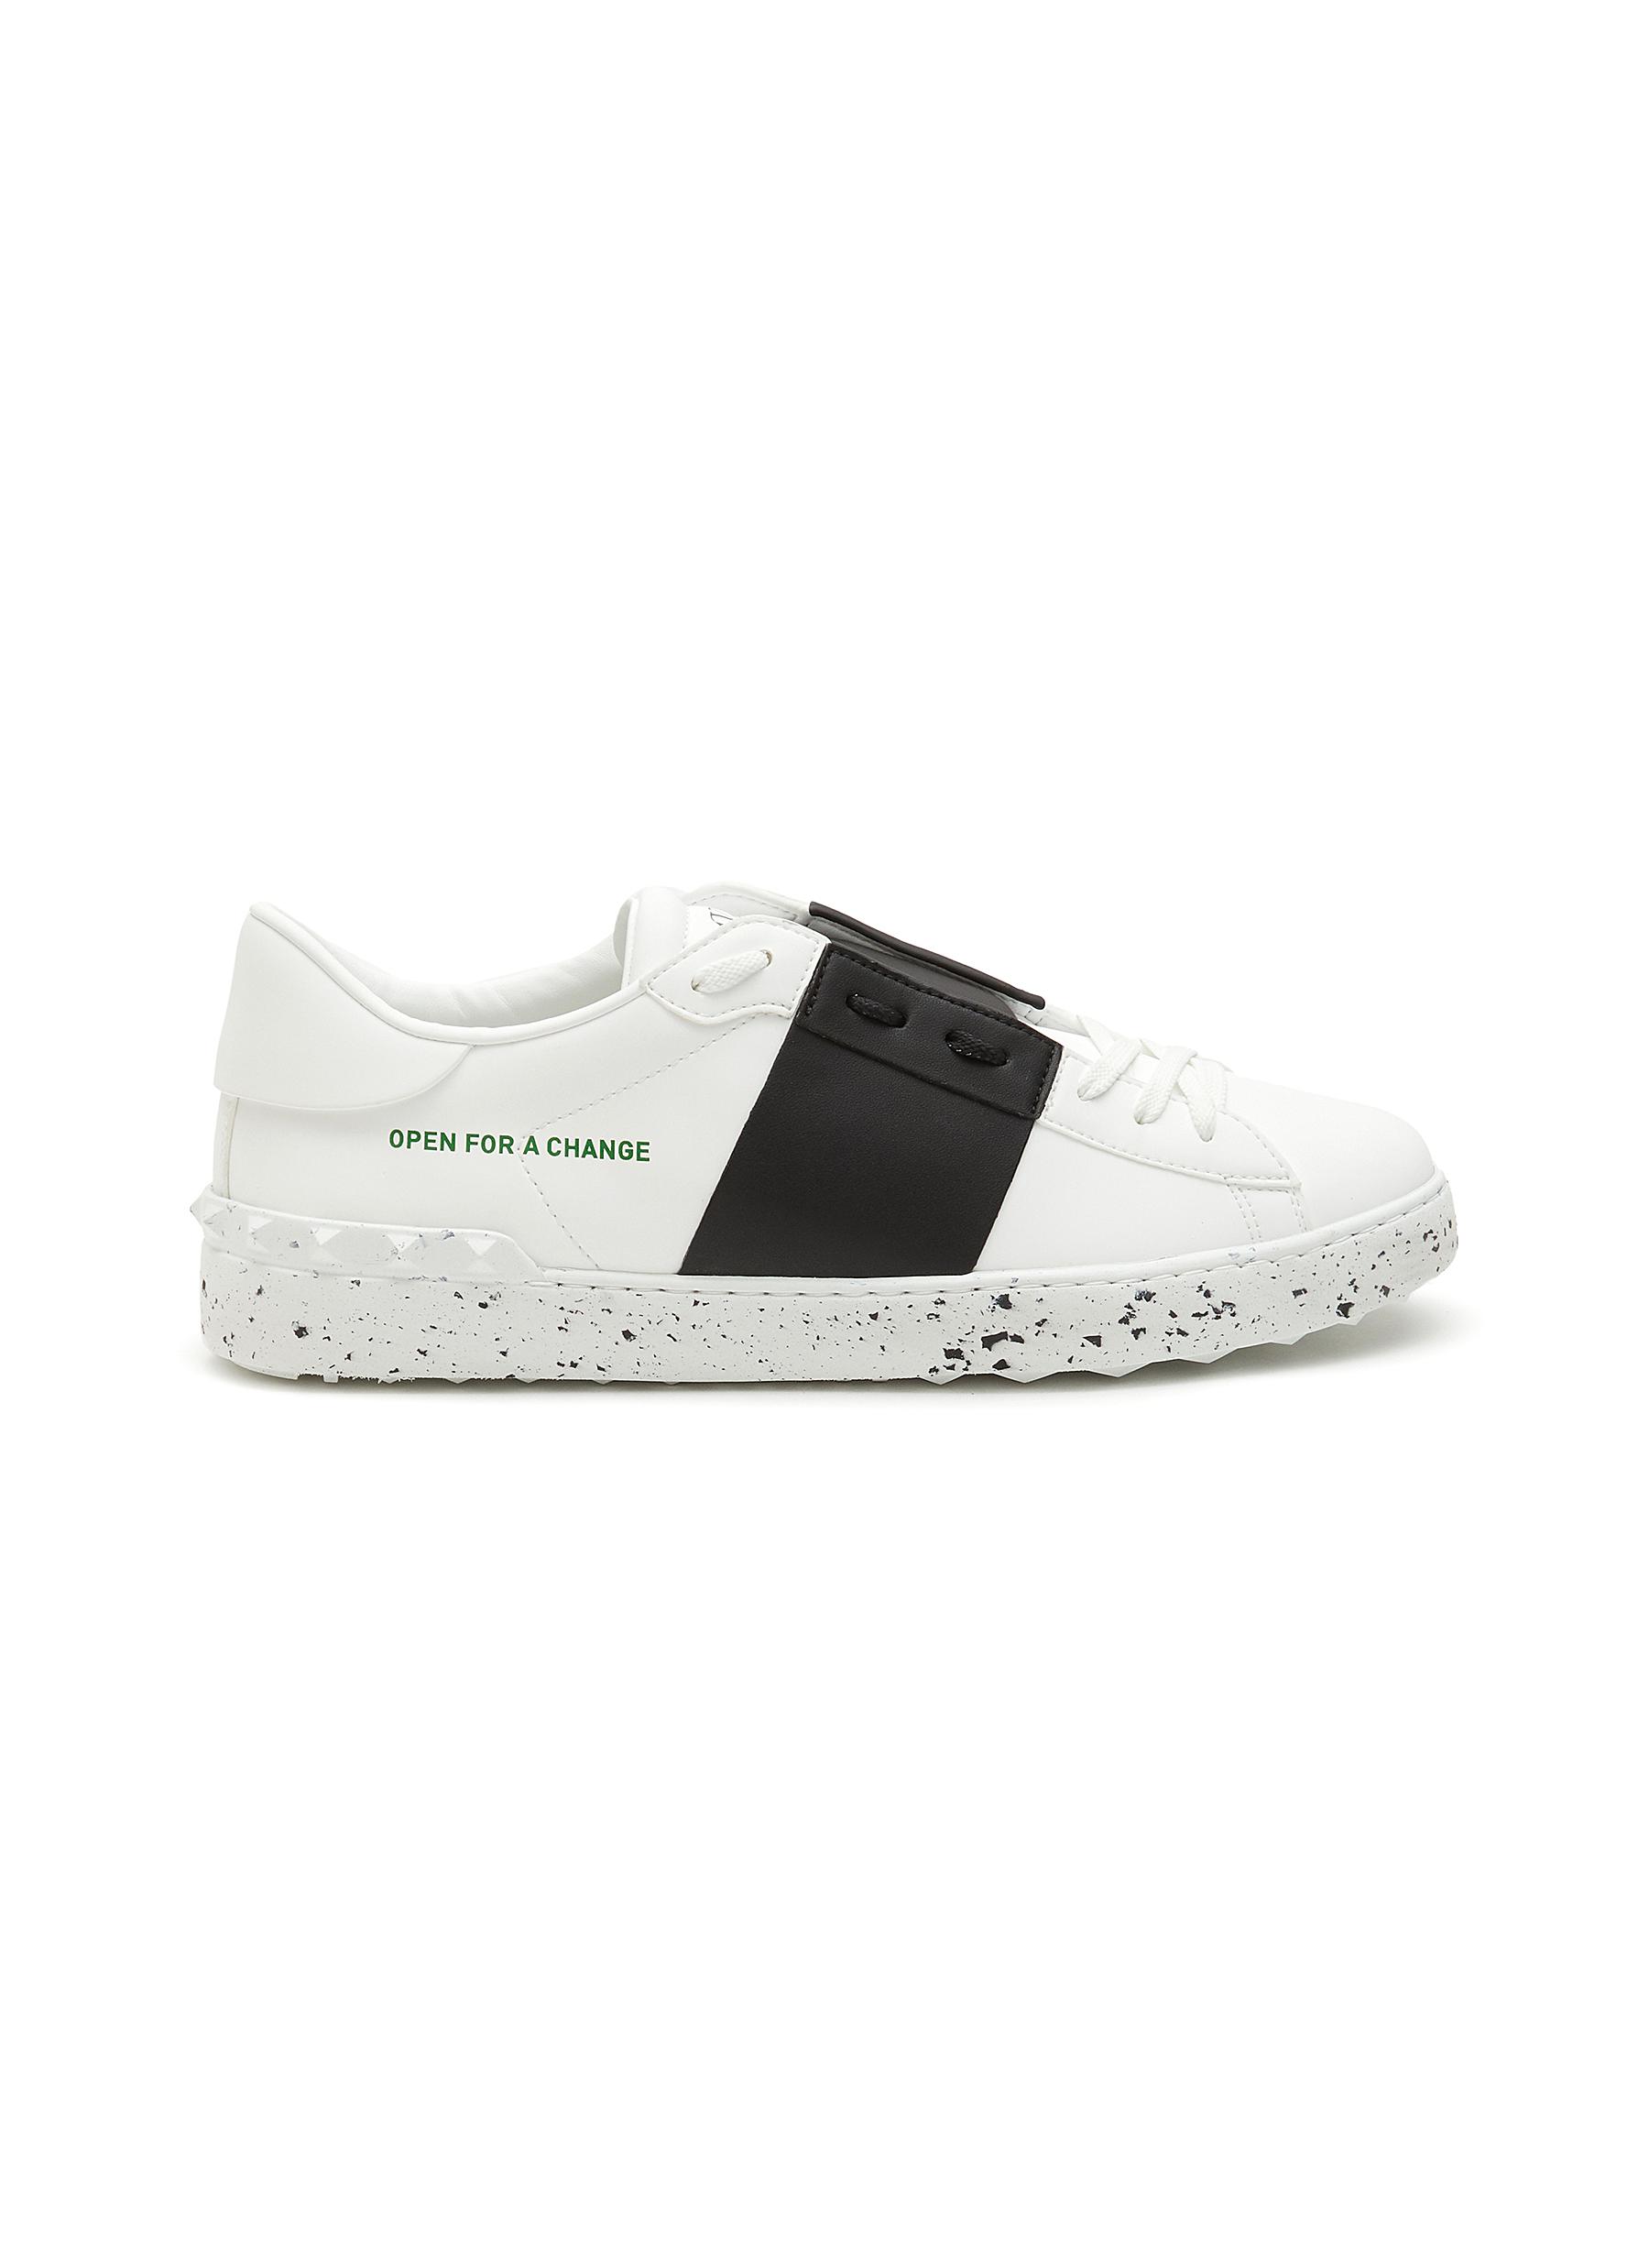 VALENTINO GARAVANI | 'OPEN FOR A CHANGE' SPECKLED SOLE LOW TOP LACE UP | Men | Lane Crawford